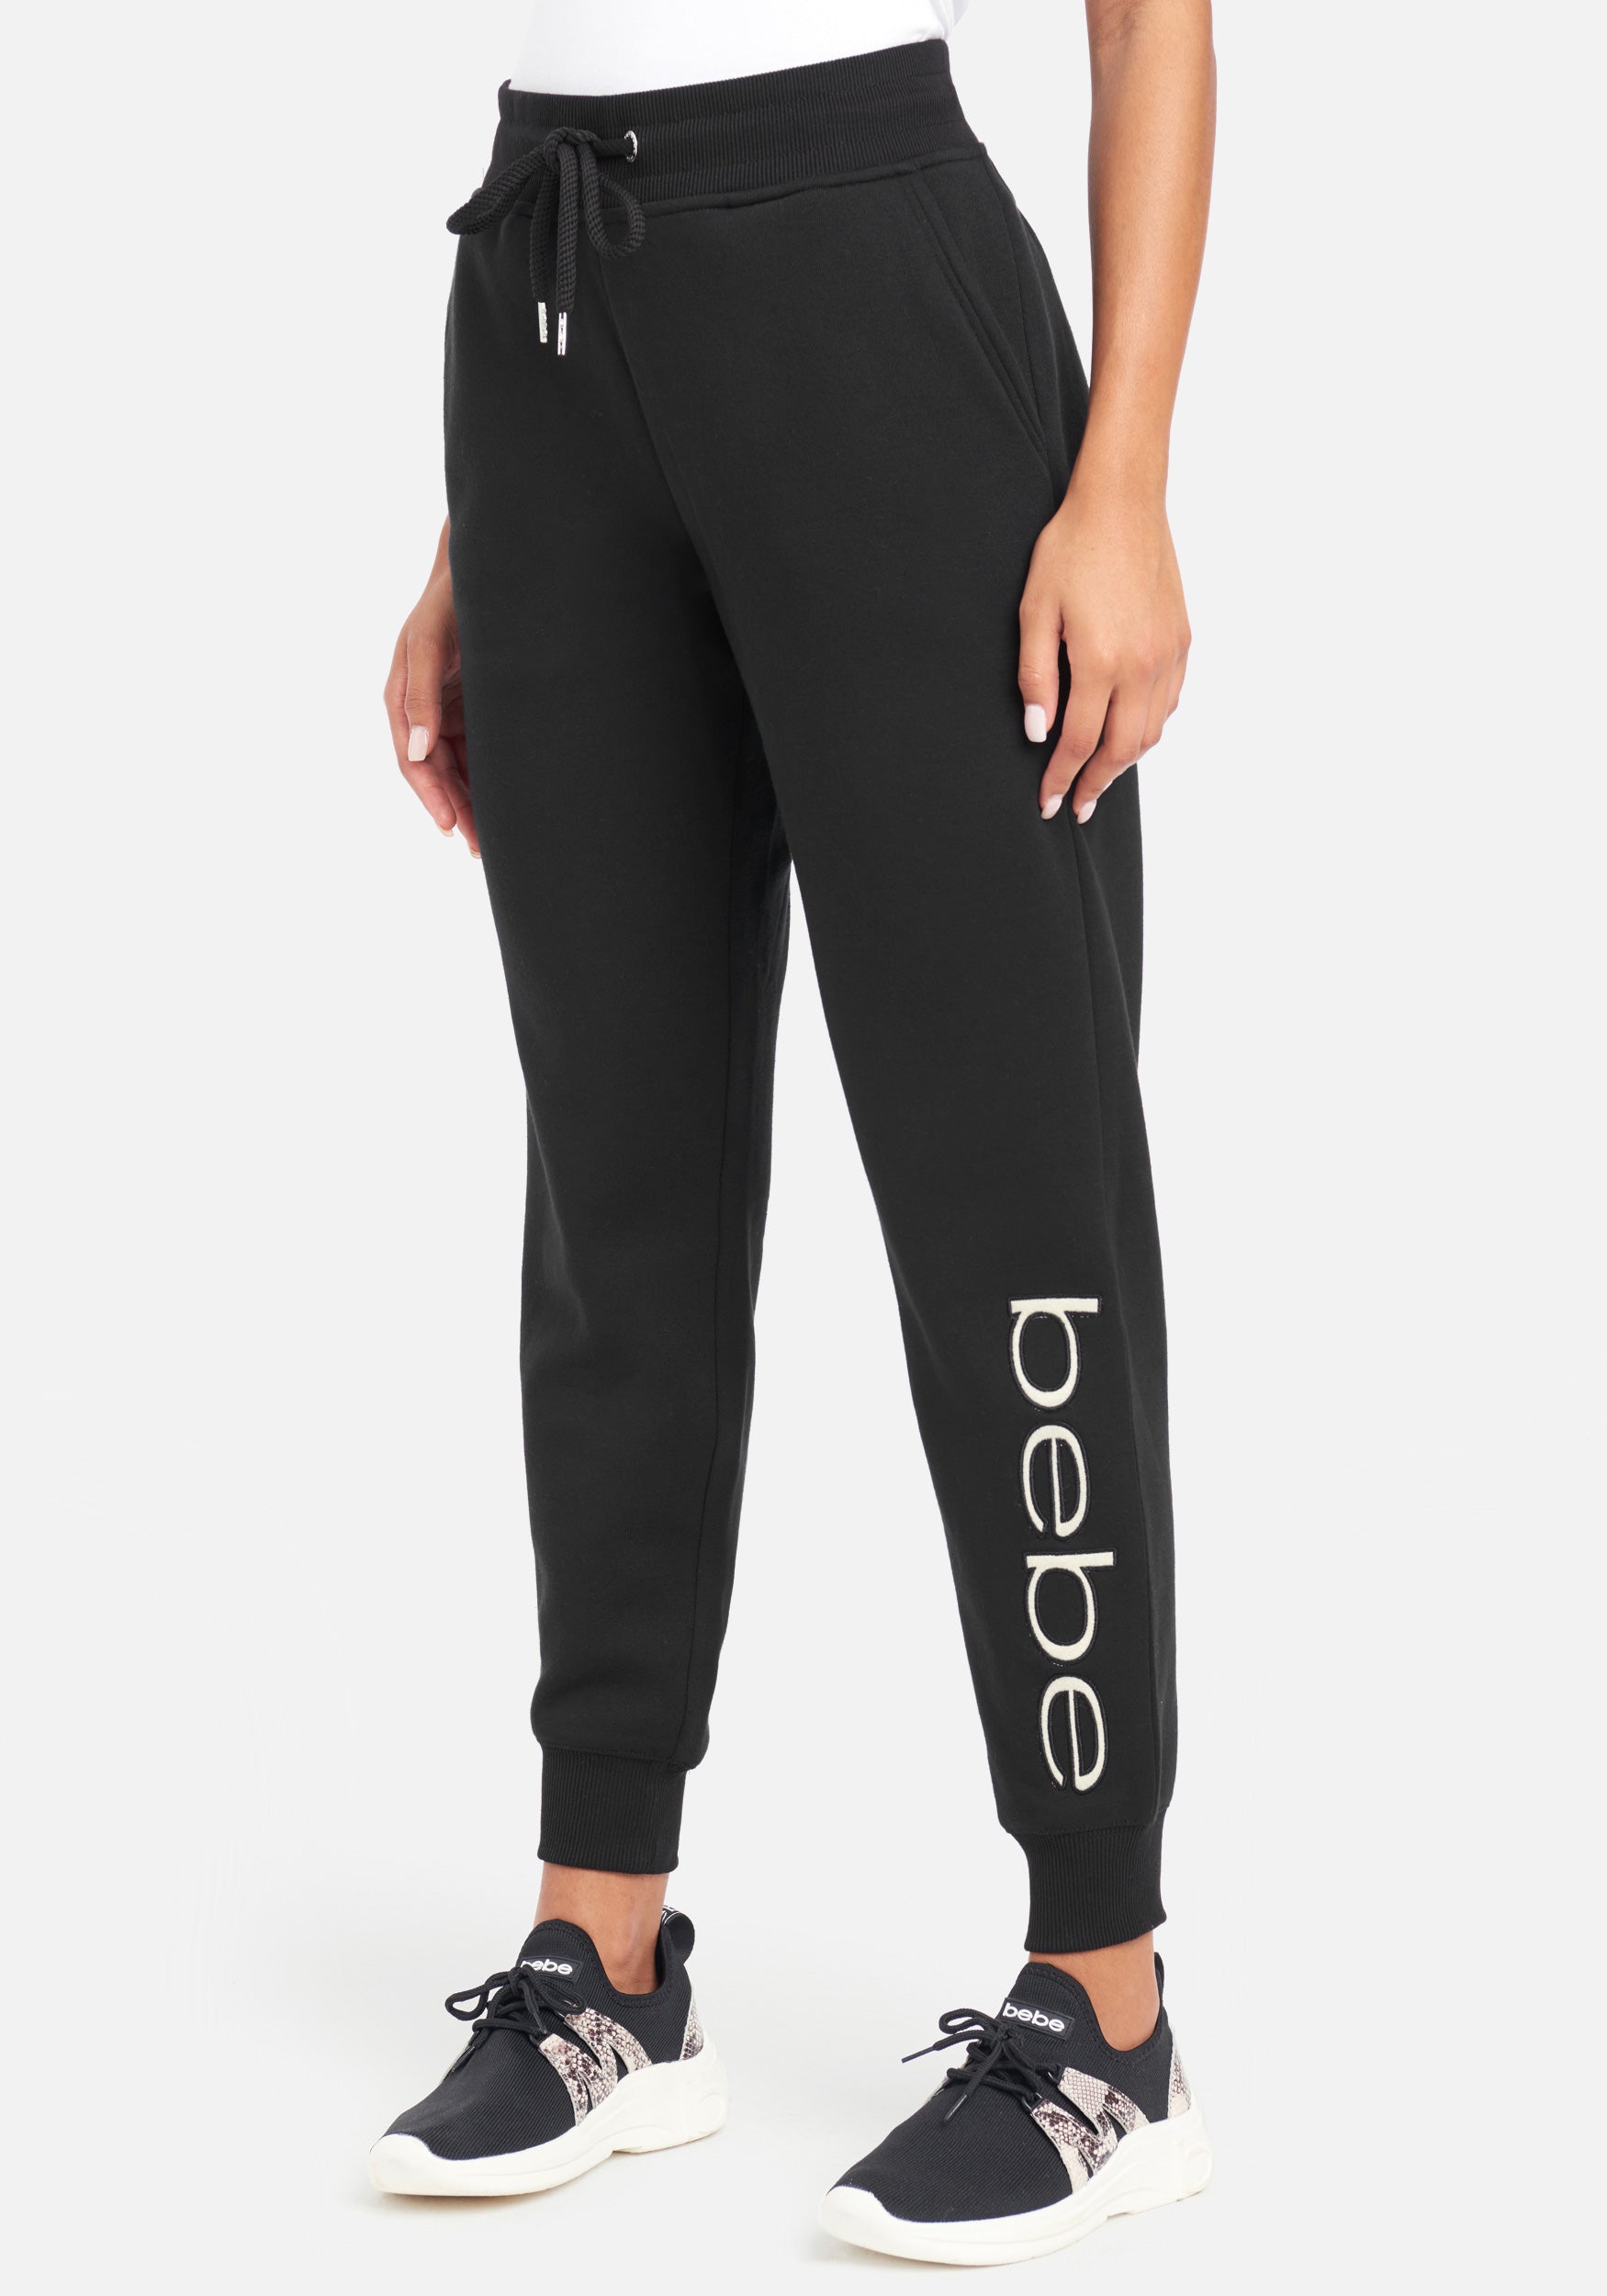 Women's Bebe Sport Sherpa Logo Patch Jogger Pant, Size Small in Black Spandex